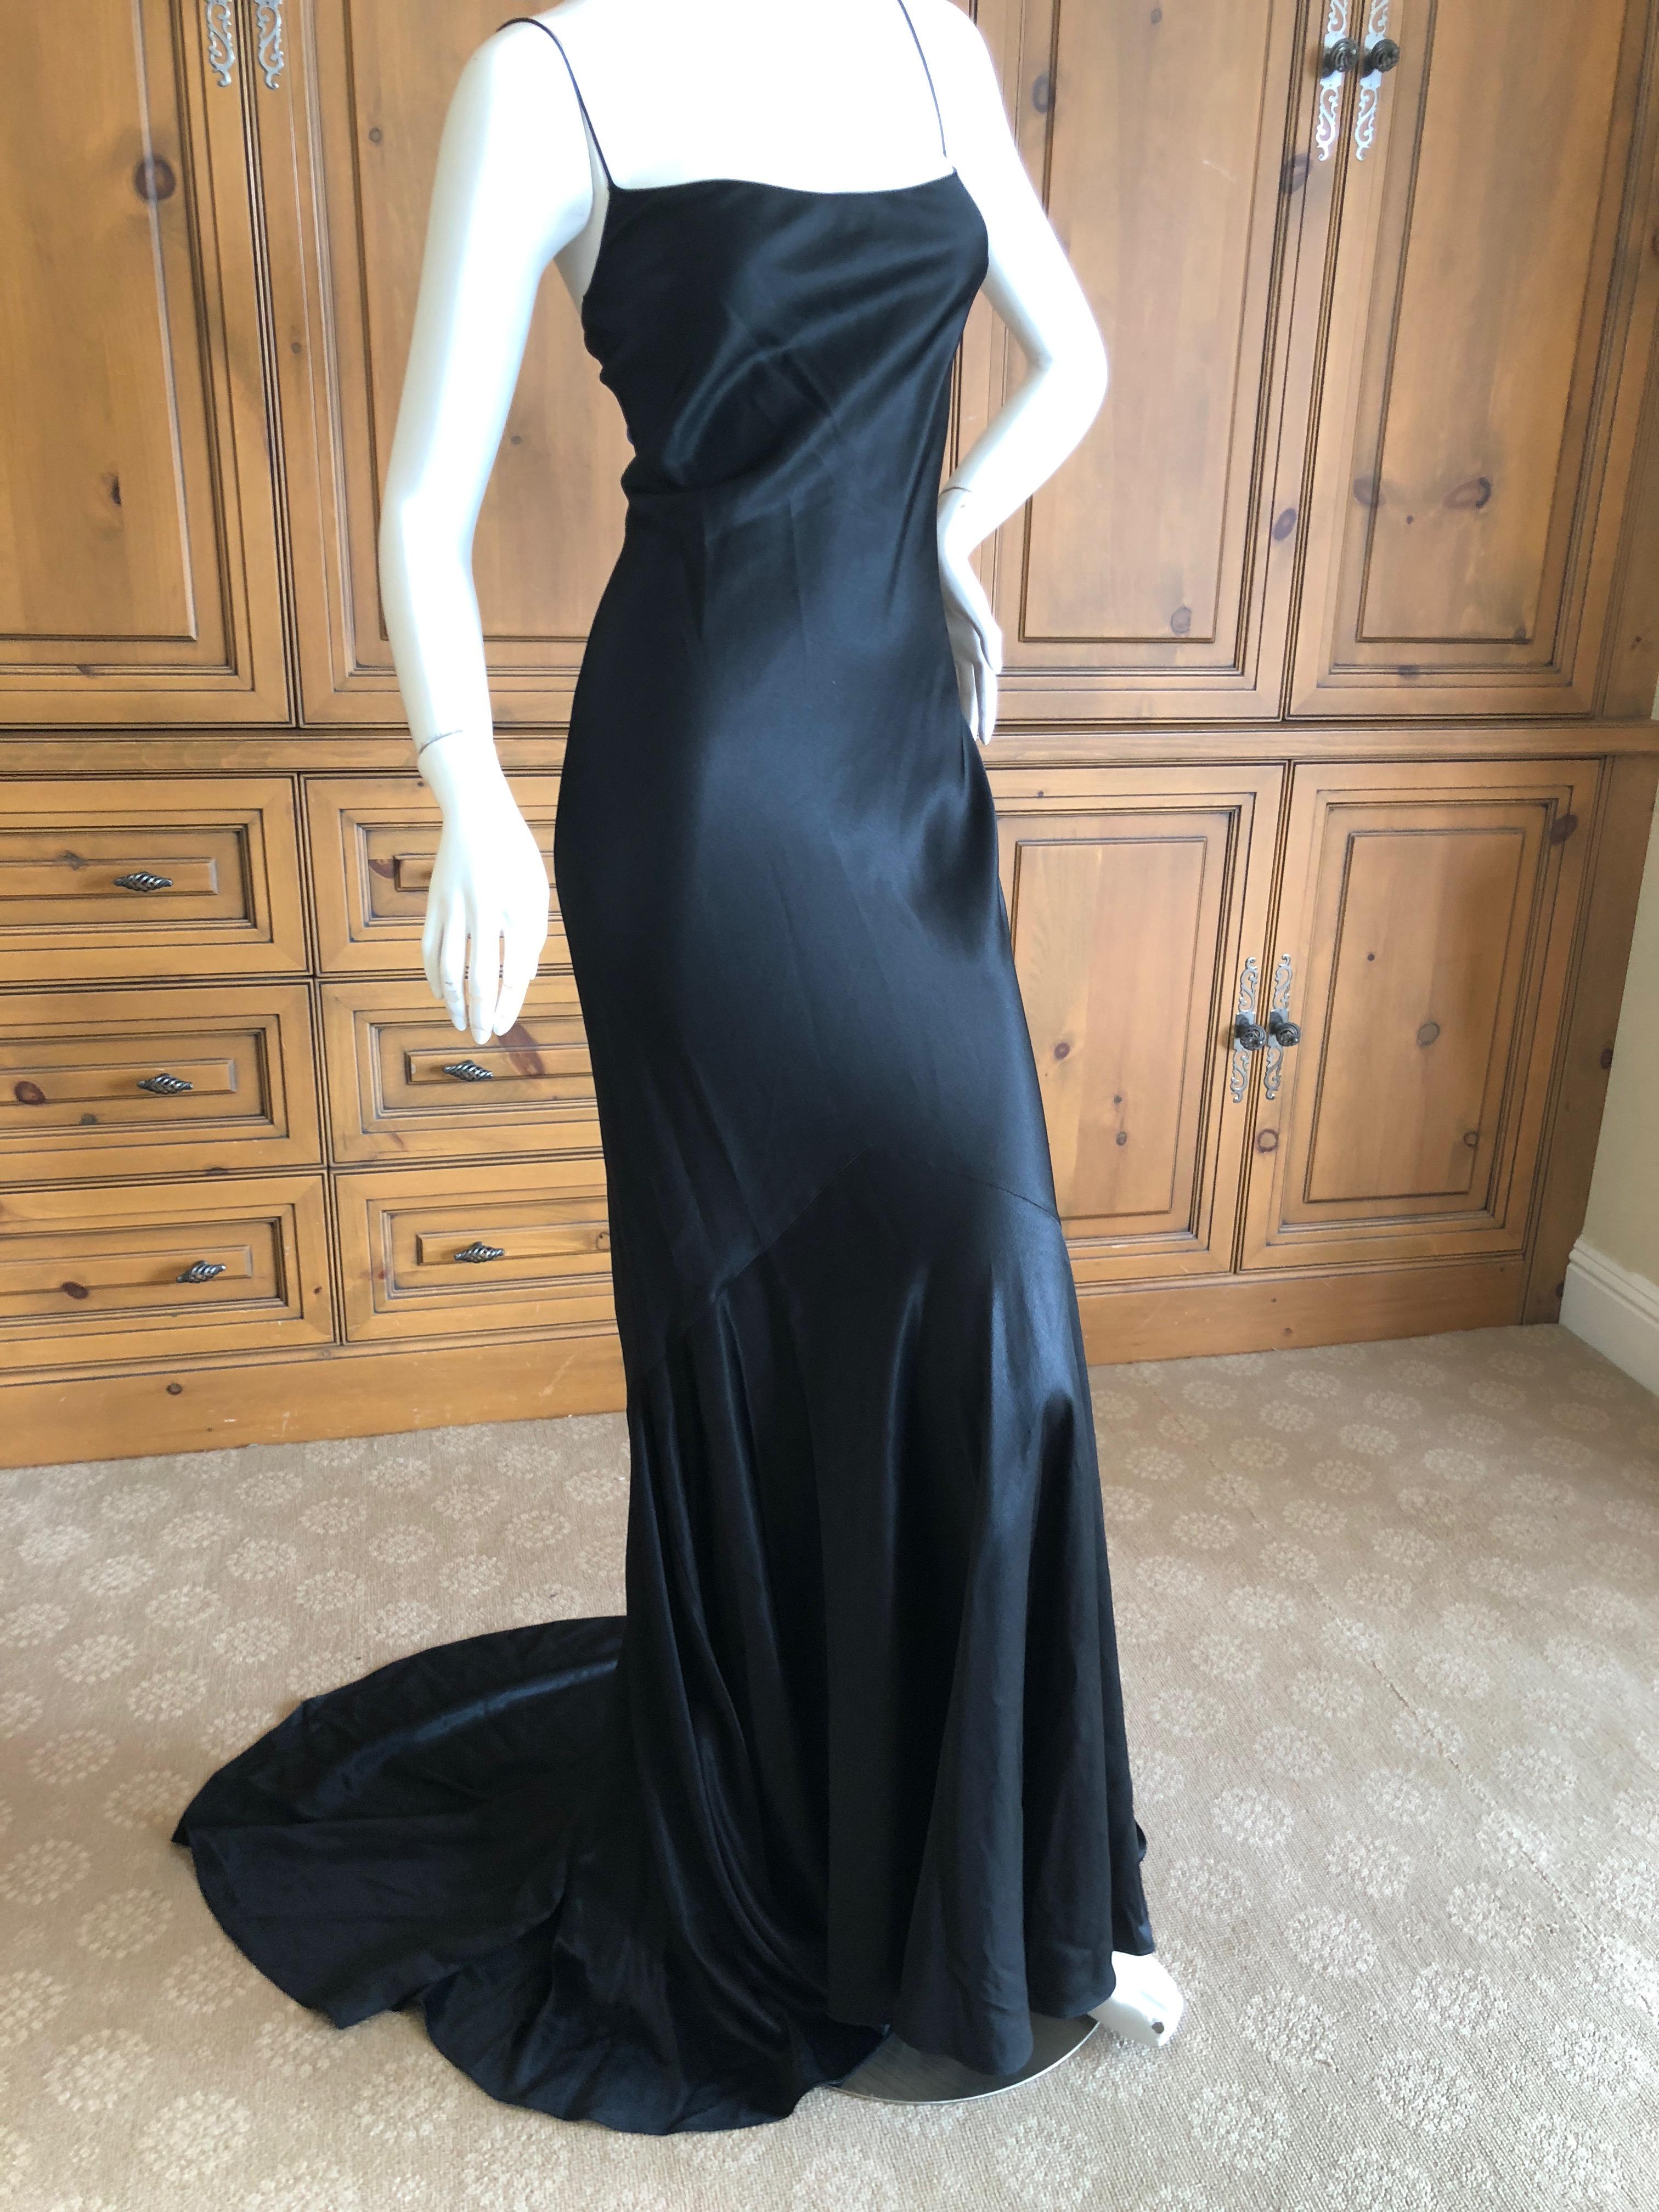 John Galliano 1990's Bias Cut Black Slip Dress with Long Train In Excellent Condition For Sale In Cloverdale, CA